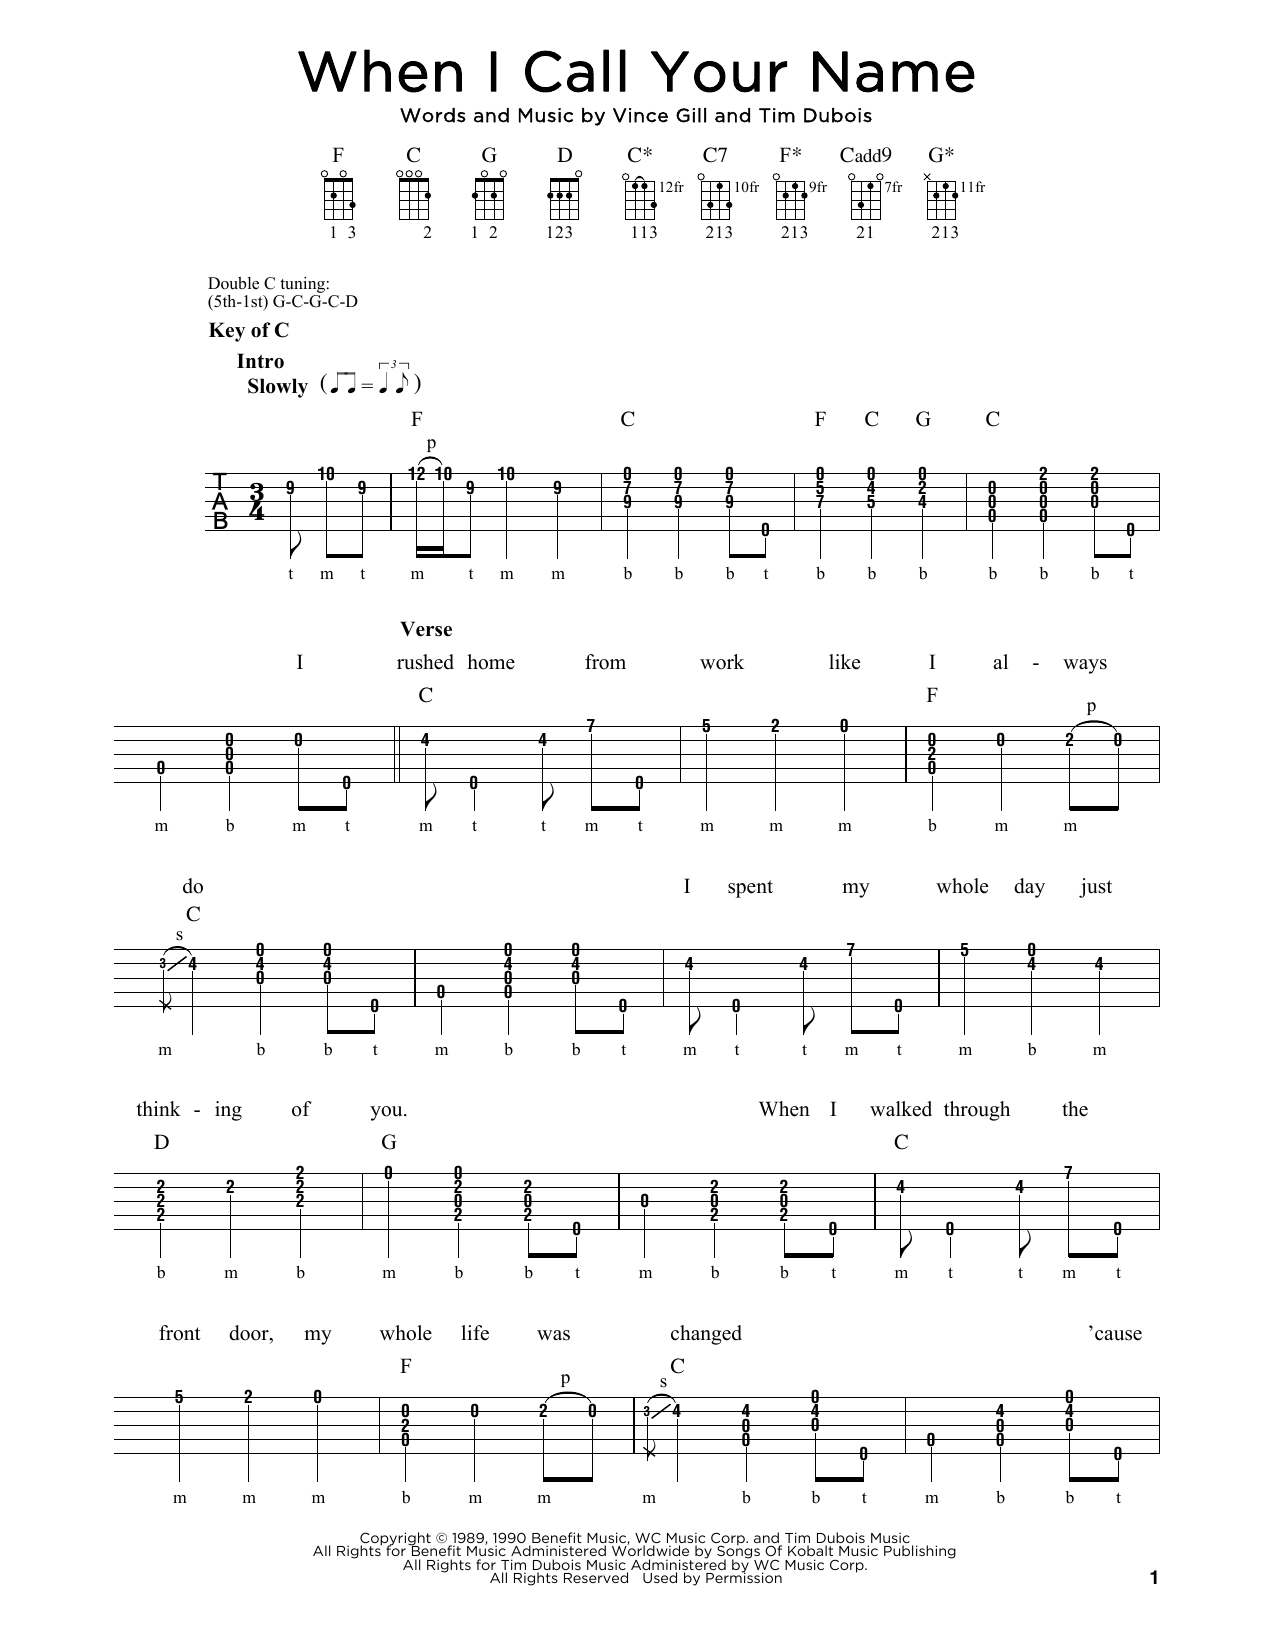 Download Vince Gill When I Call Your Name Sheet Music